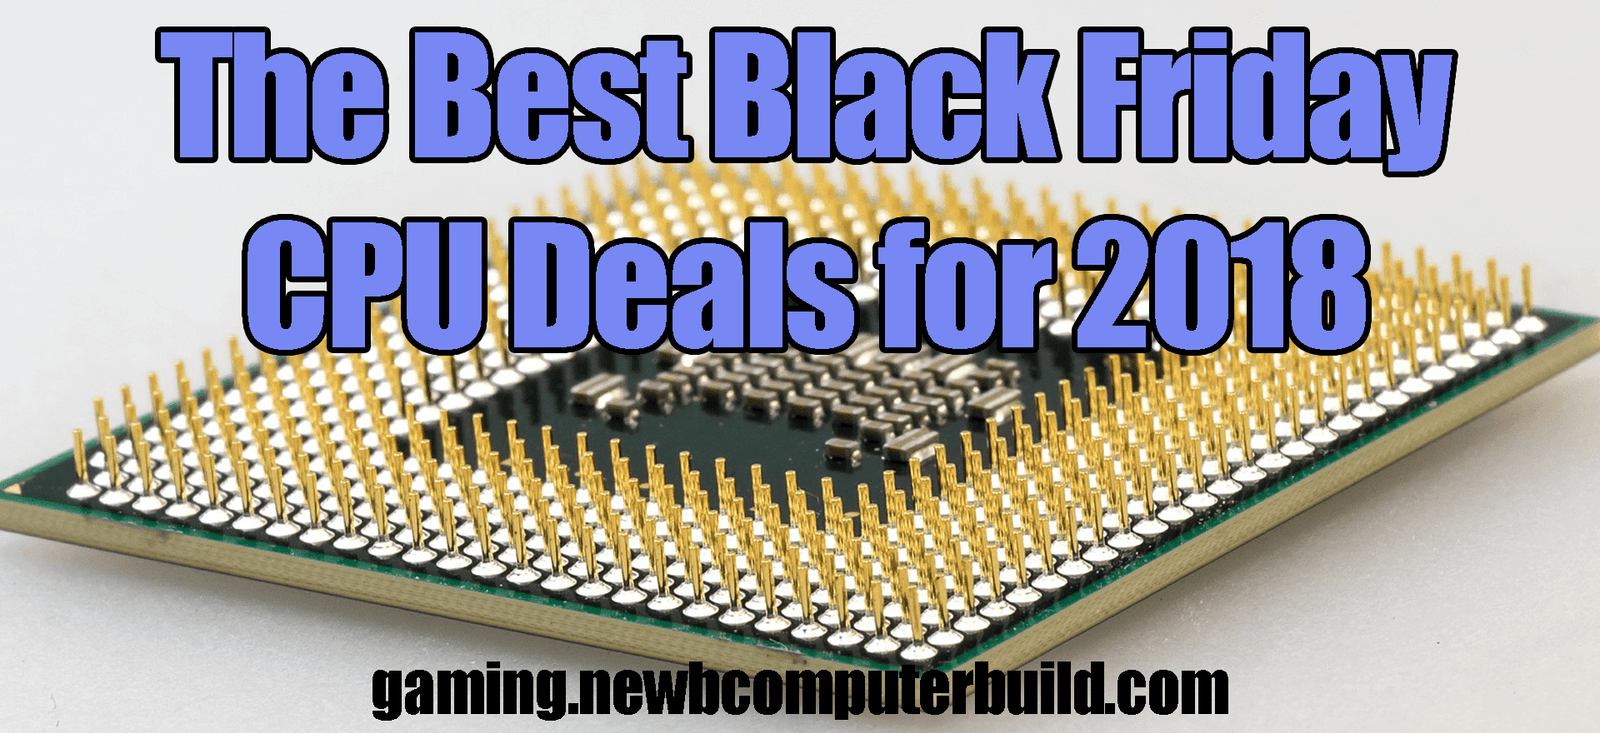 The Best Black Friday CPU Deals for 2018